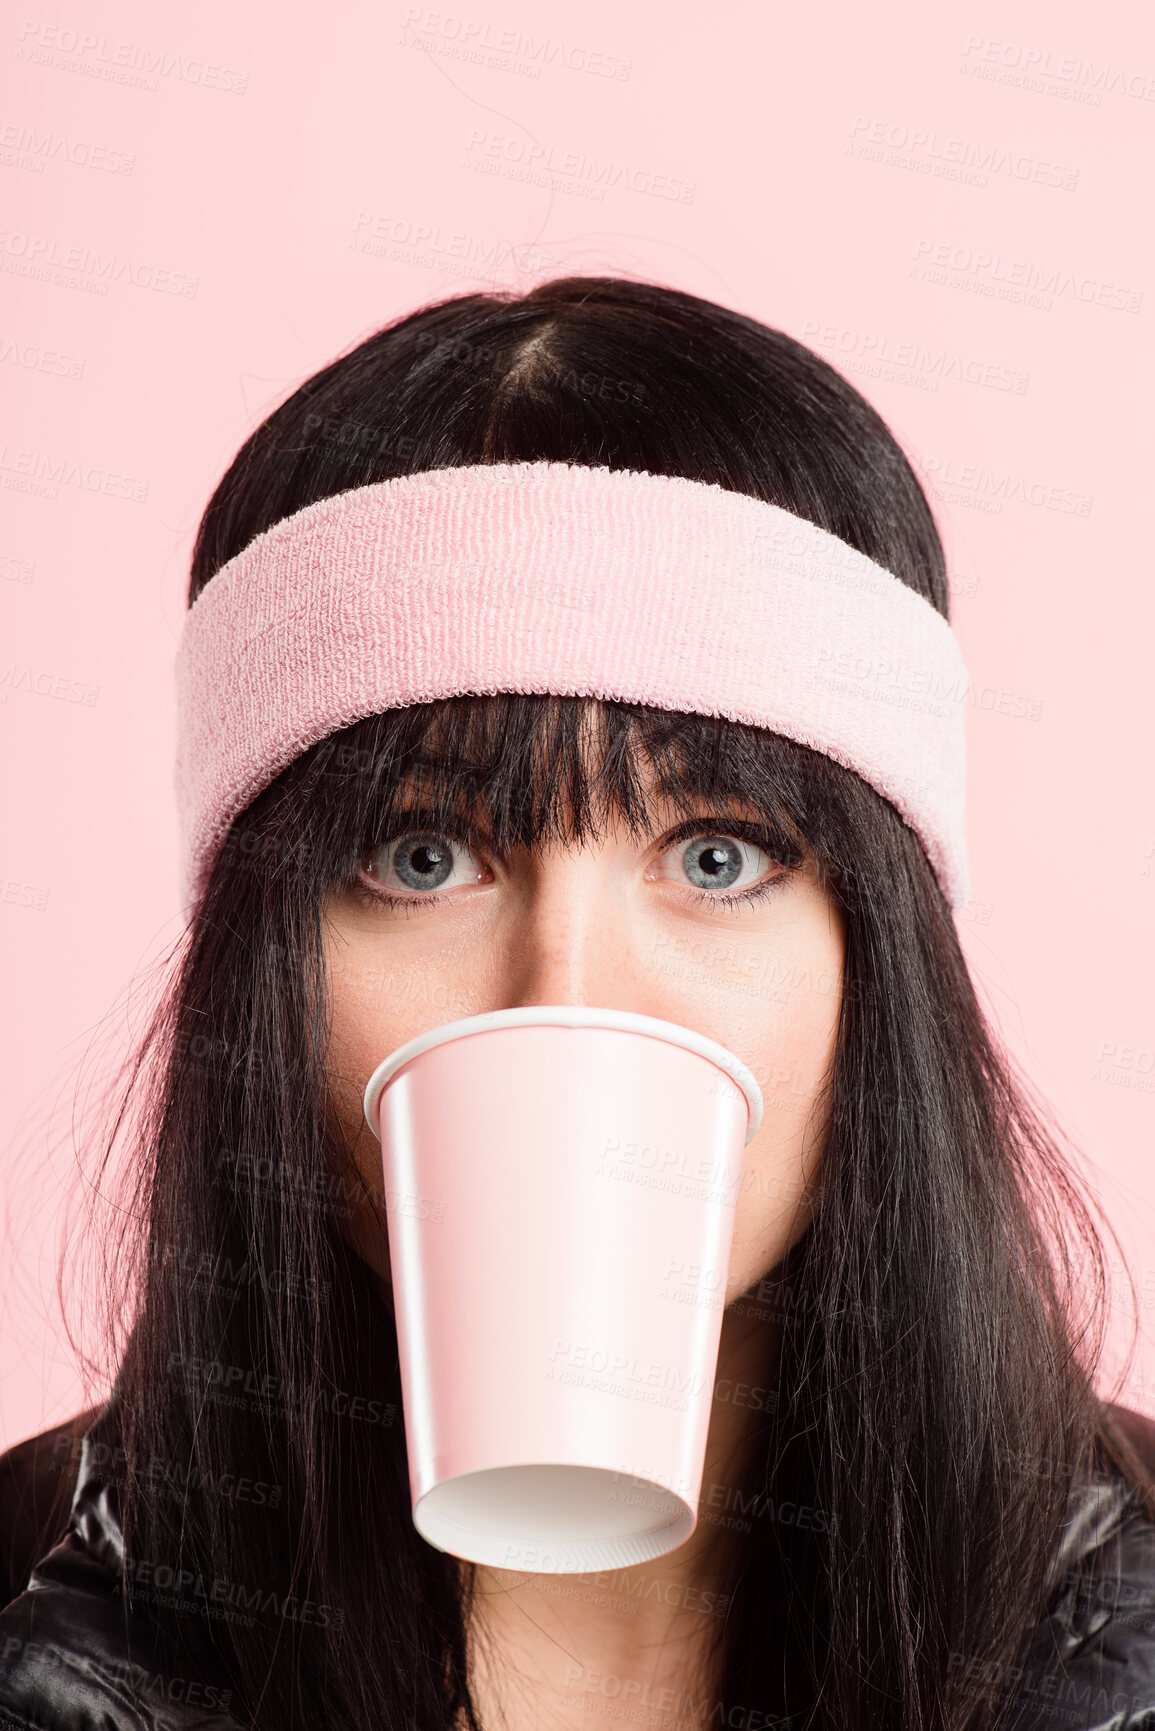 Buy stock photo Shot of a young woman standing in the studio and posing while wearing a headband while biting a coffee cup